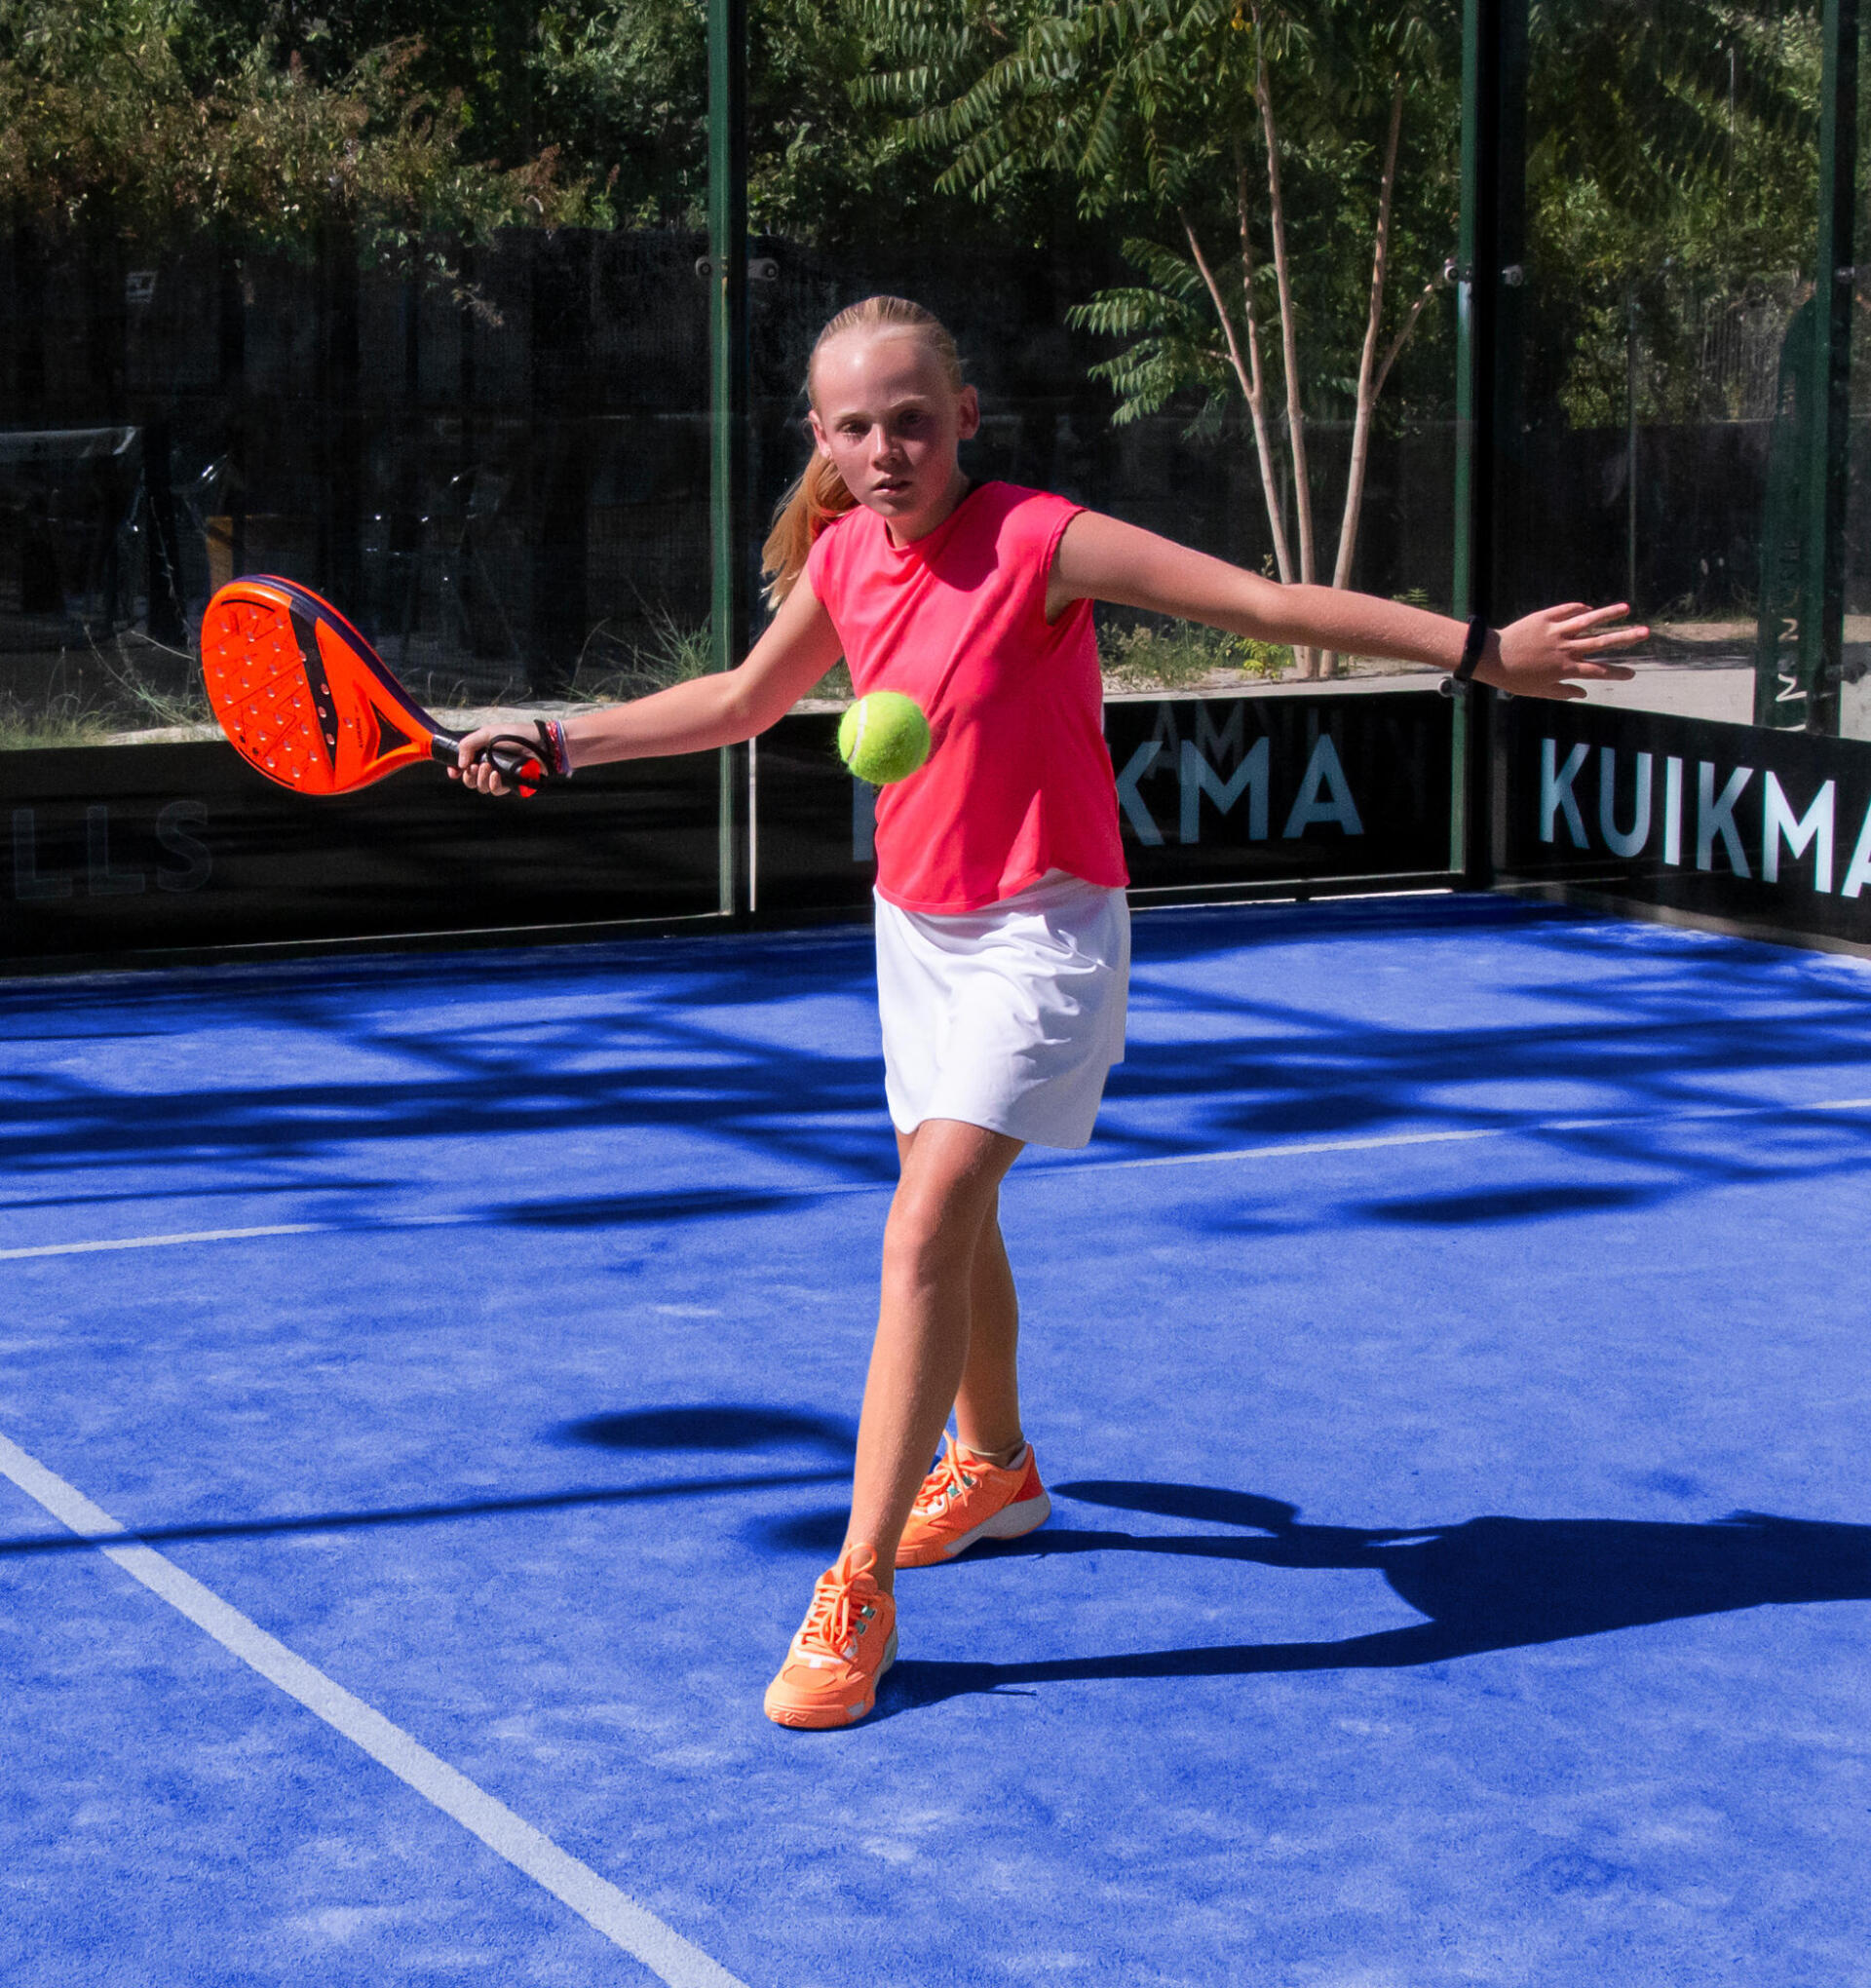 Girl playing padel on outdoor court